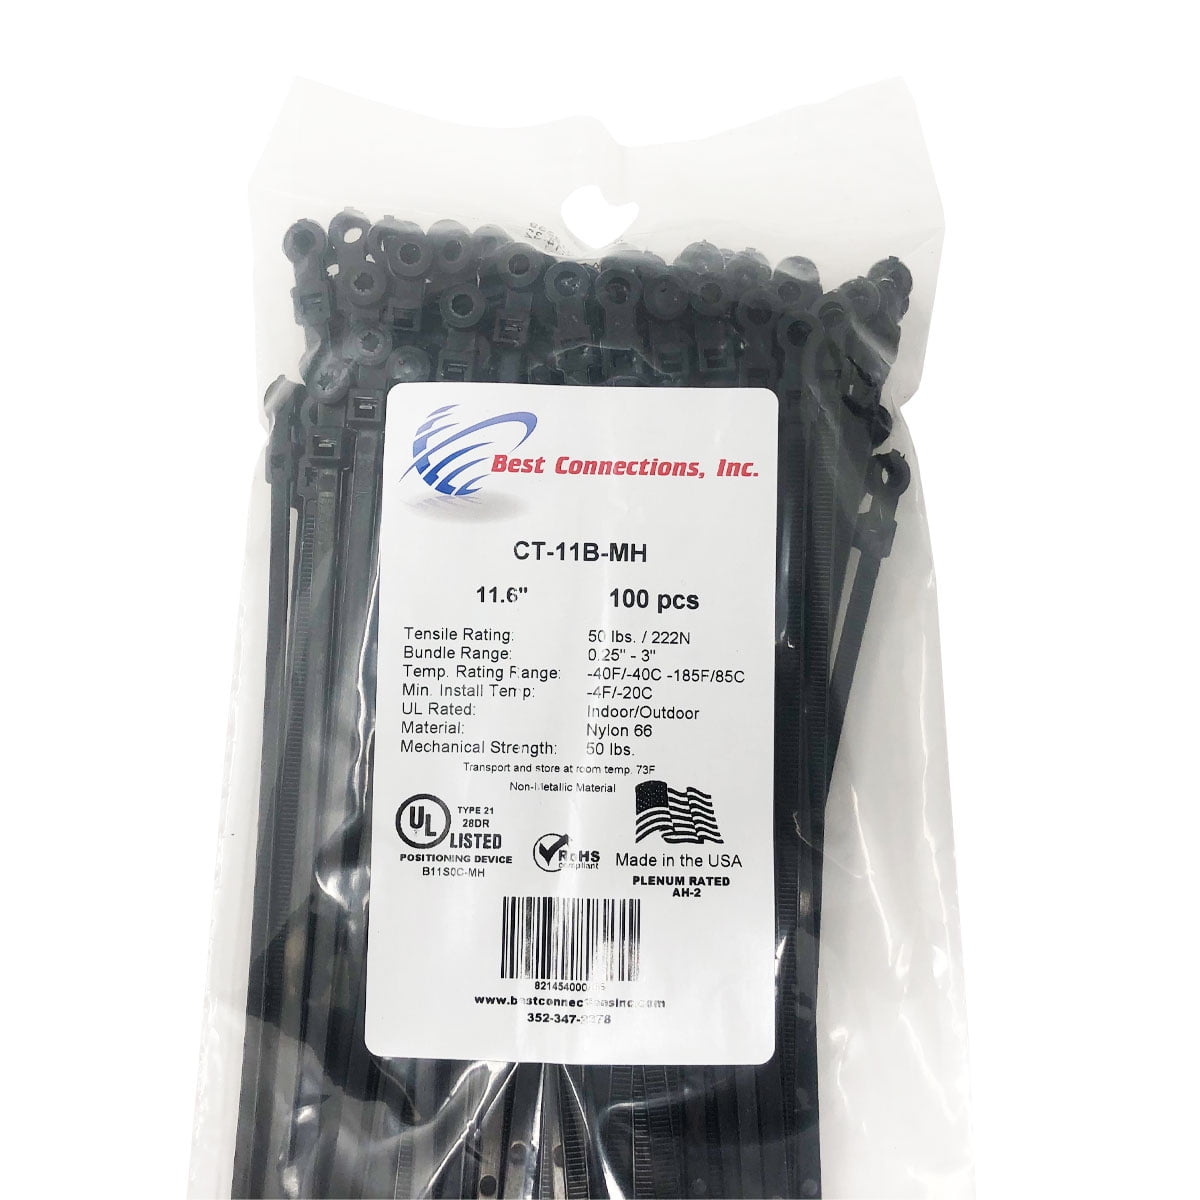 1000 Pieces 8 Screw Down Nylon Cable Zip Ties Mounting Hole 50 Lbs Test Black